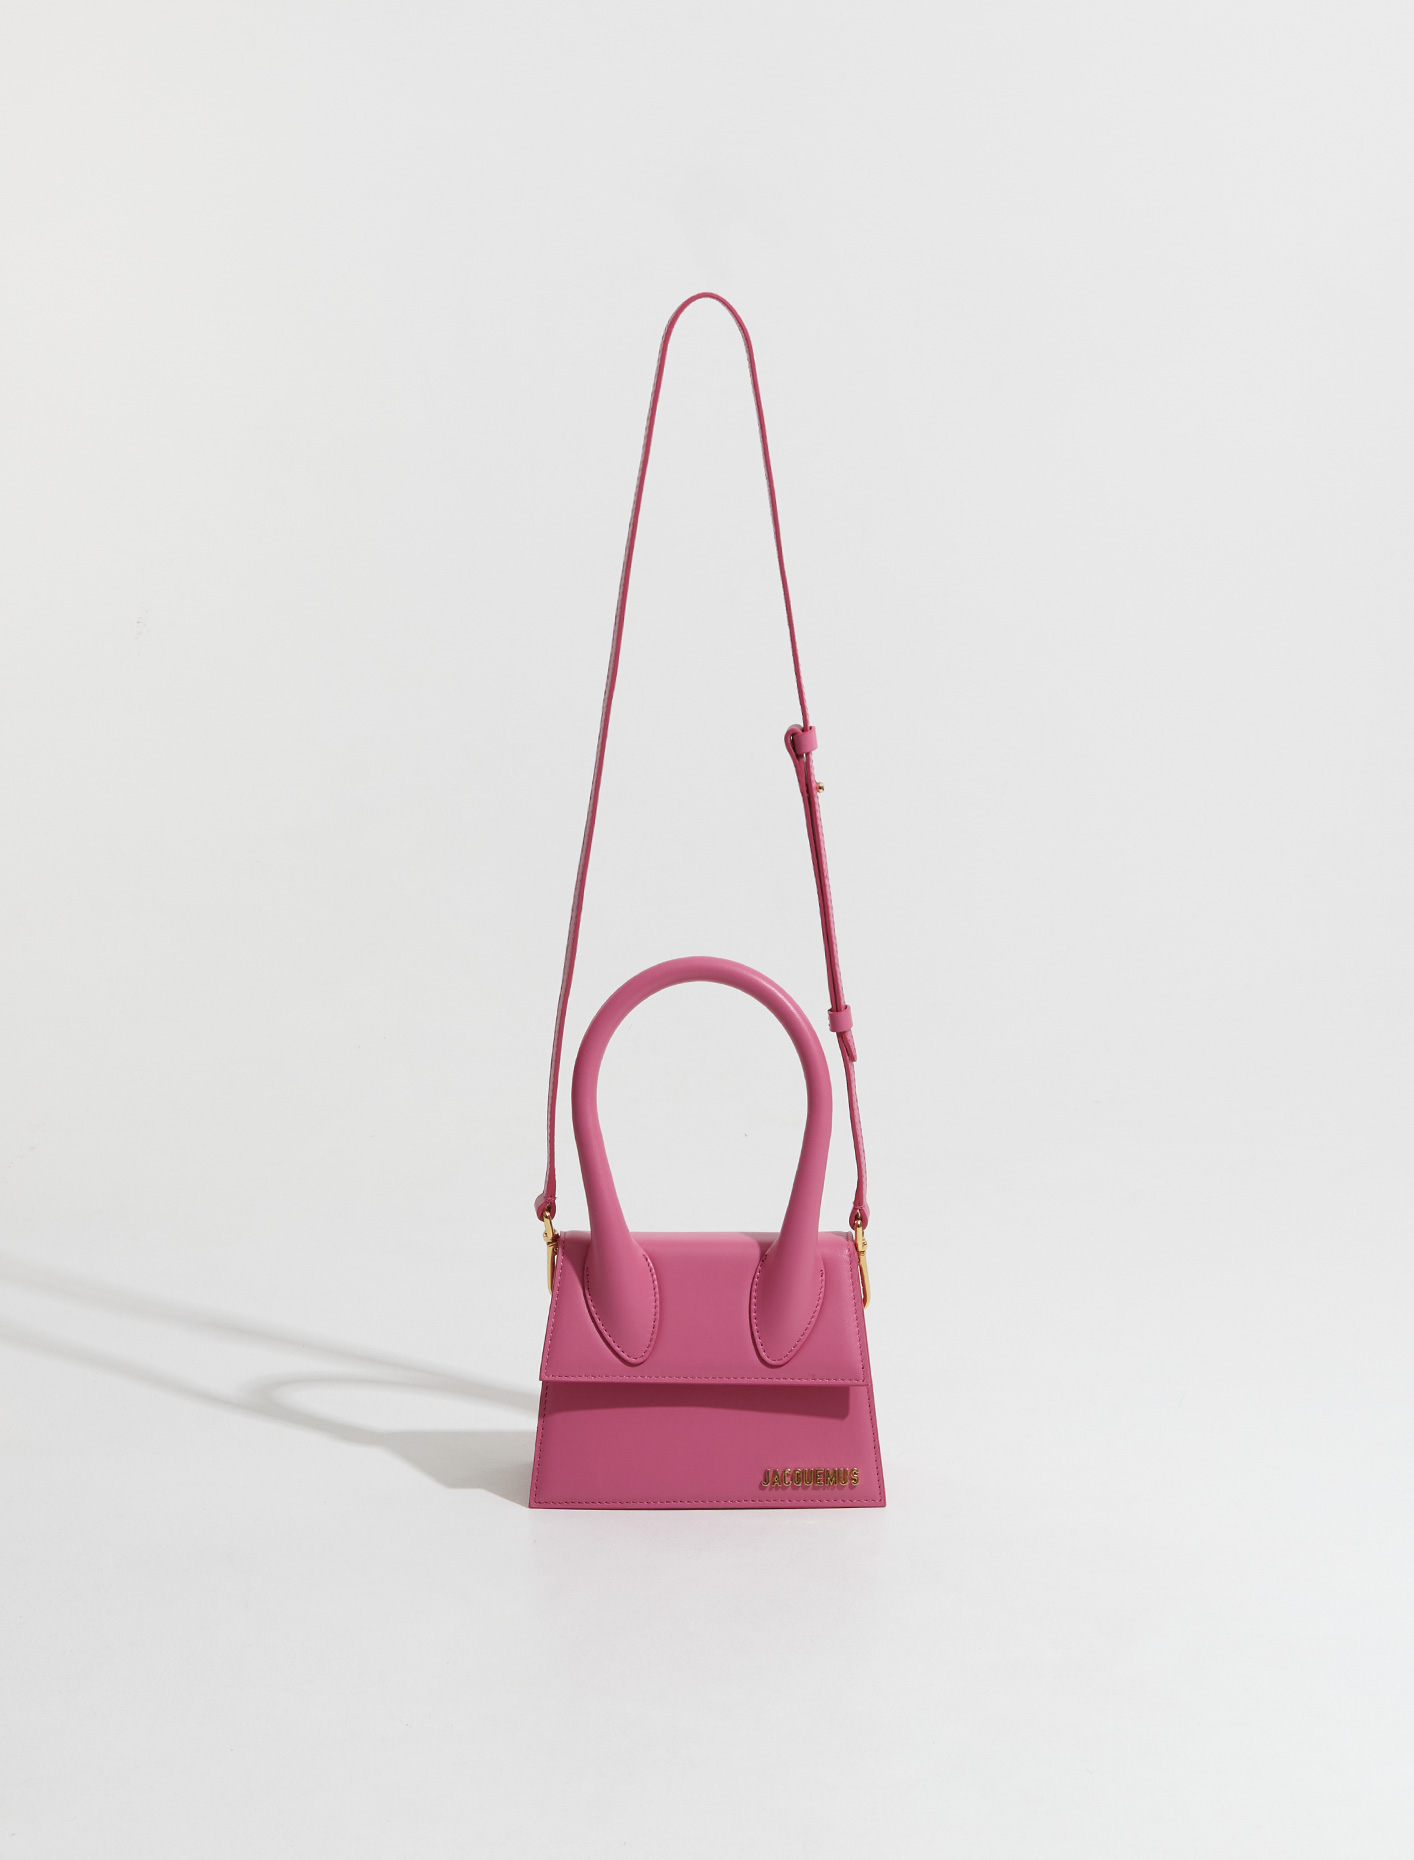 Jacquemus Le Chiquito Moyen in Pink | Voo Store Berlin | Worldwide Shipping